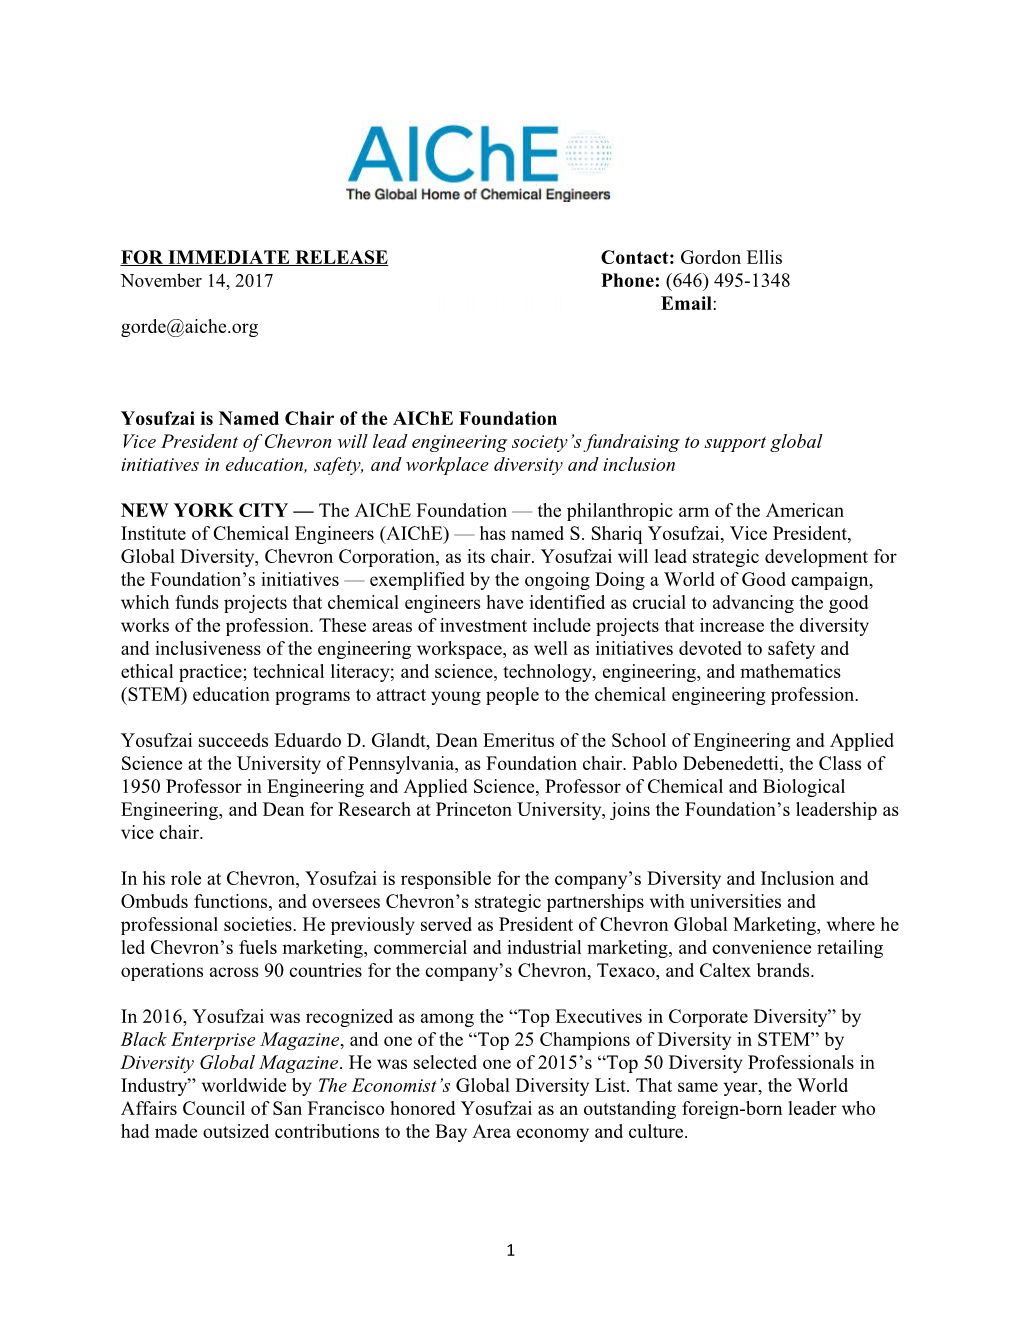 Yosufzai Is Named Chair of the Aiche Foundation